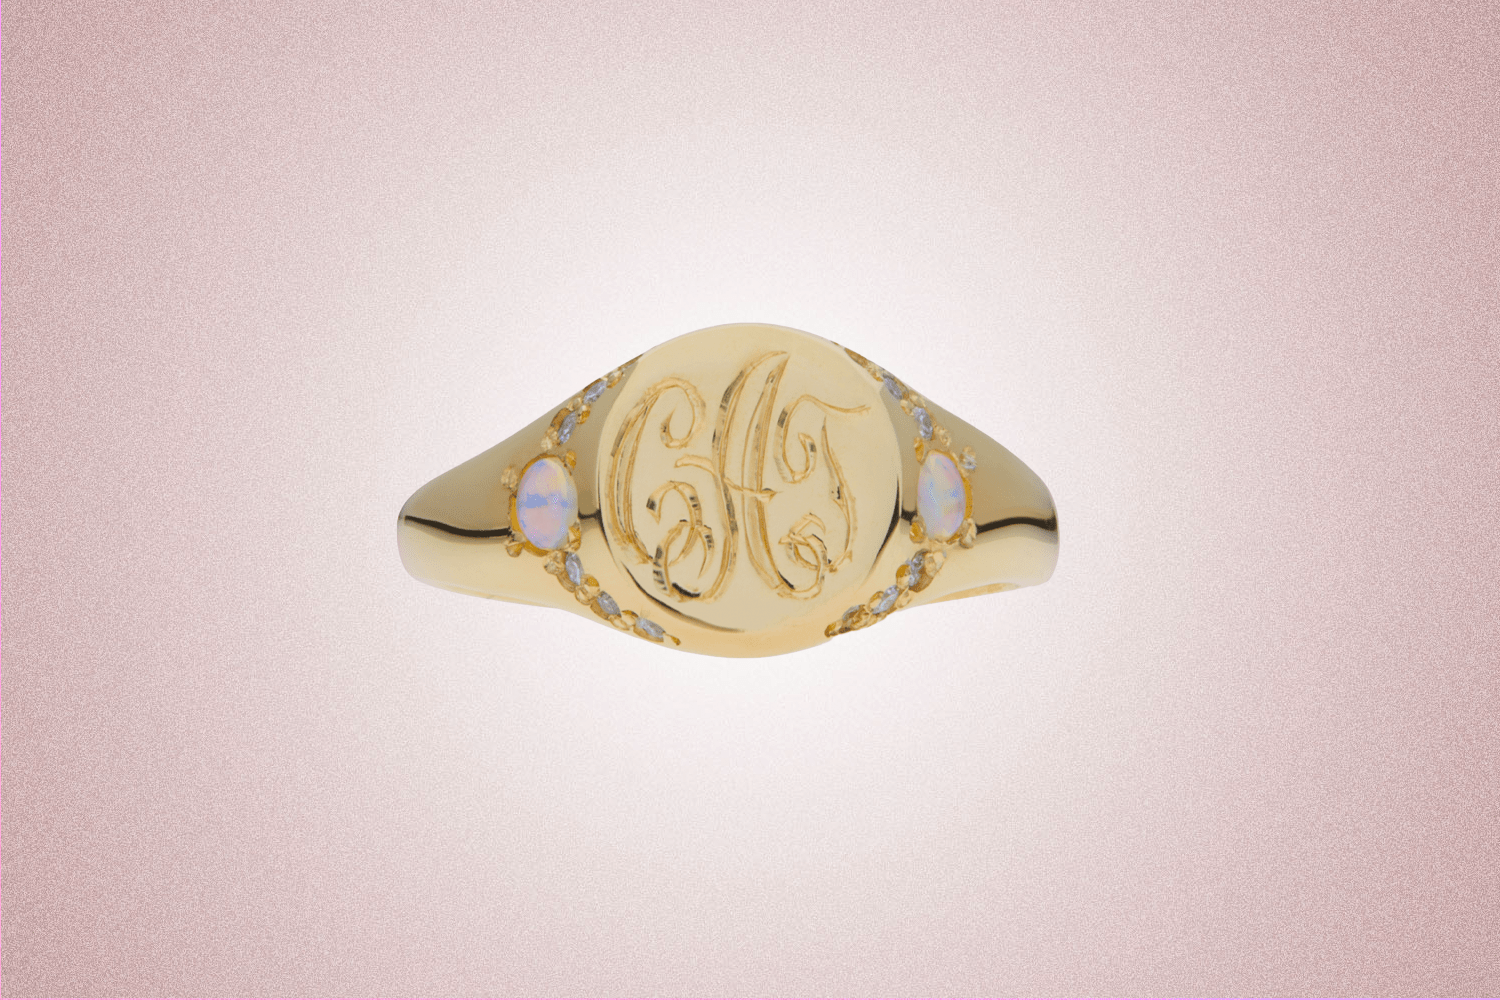 A gold signet ring set with opals and diamonds on either side from Catbird, a perfect Valentine’s Day gift for 2022, on a pink background.